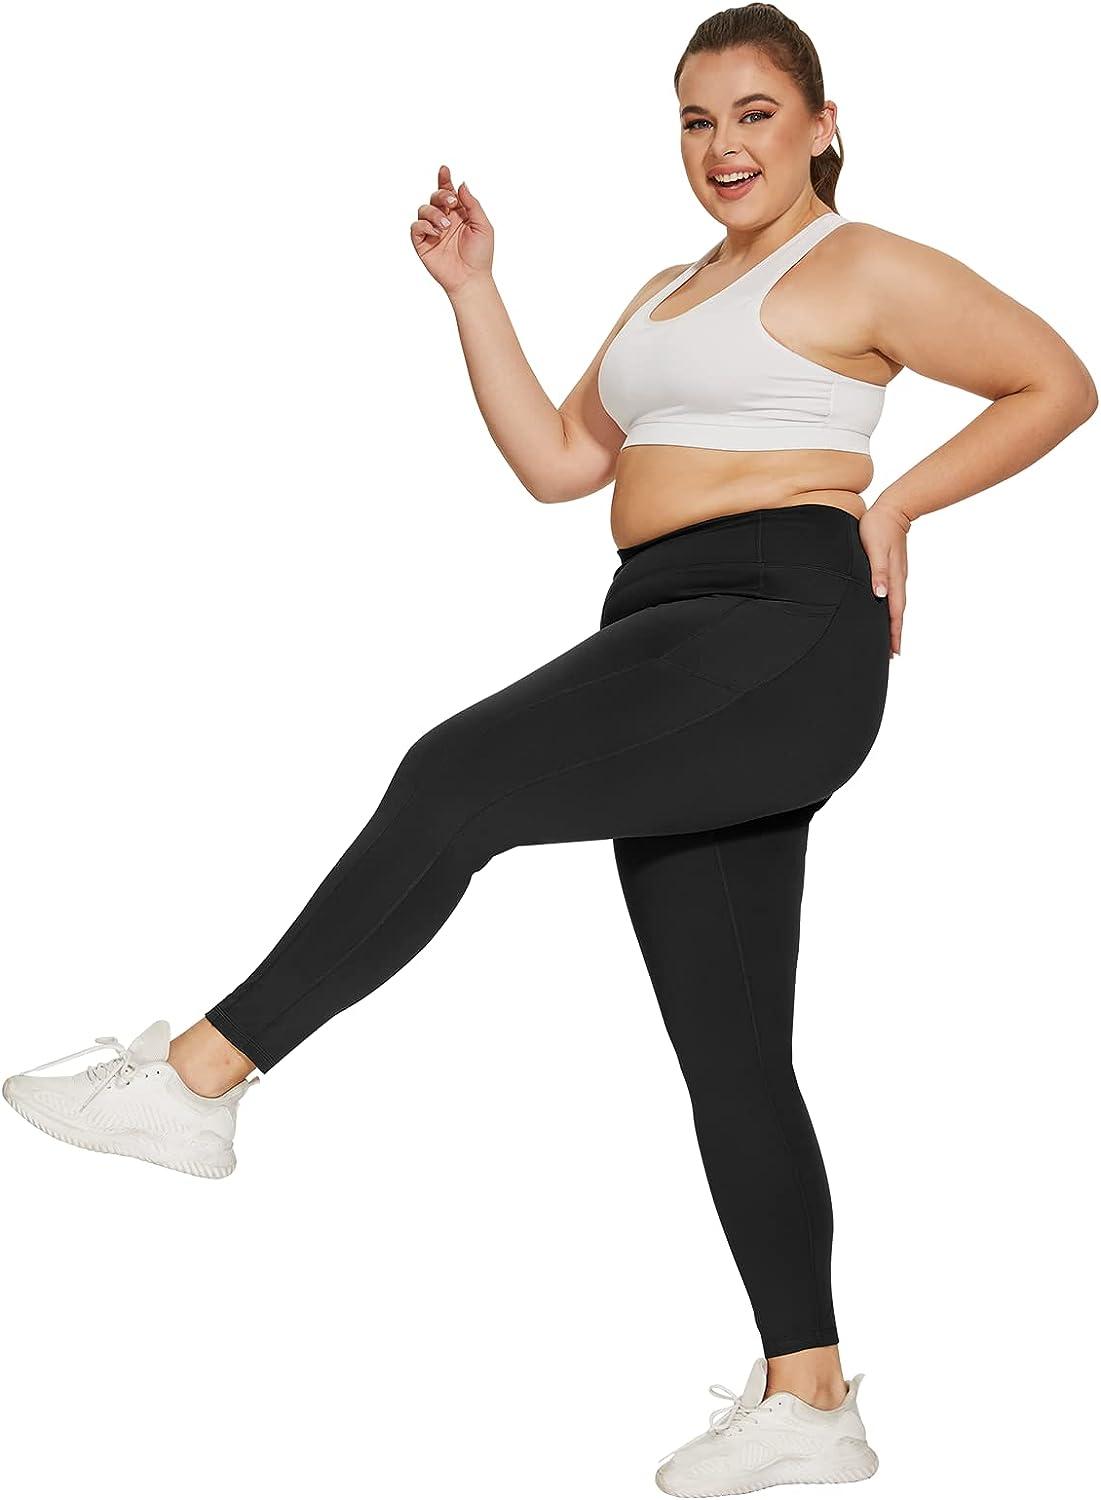 Woman Within Athletic Workout Pants 26W Petite Black Exercise Lounging